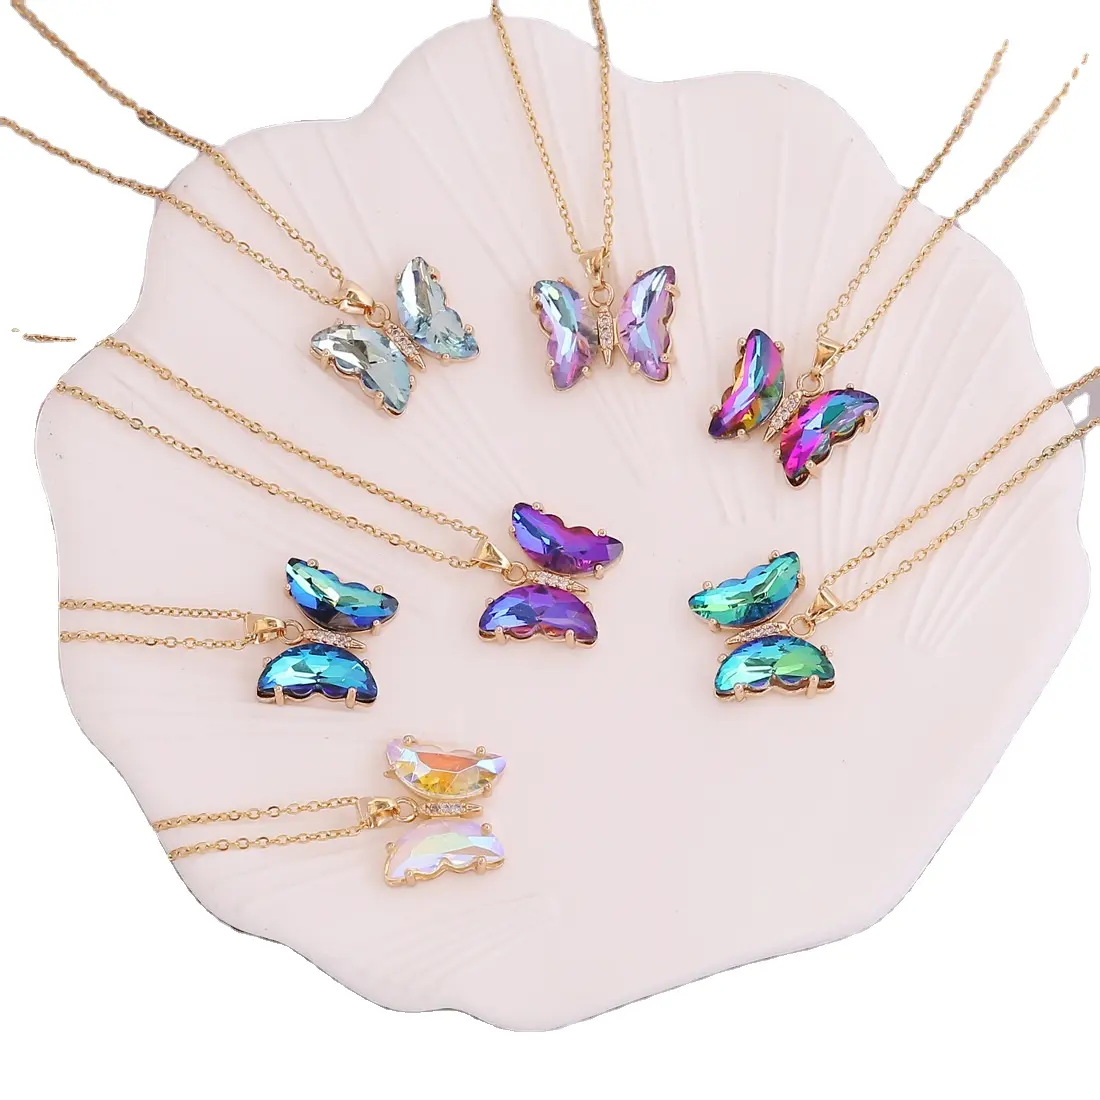 New Personality Fashion Clavicle Chain Necklace Gradient Butterfly Pendant Necklace Women